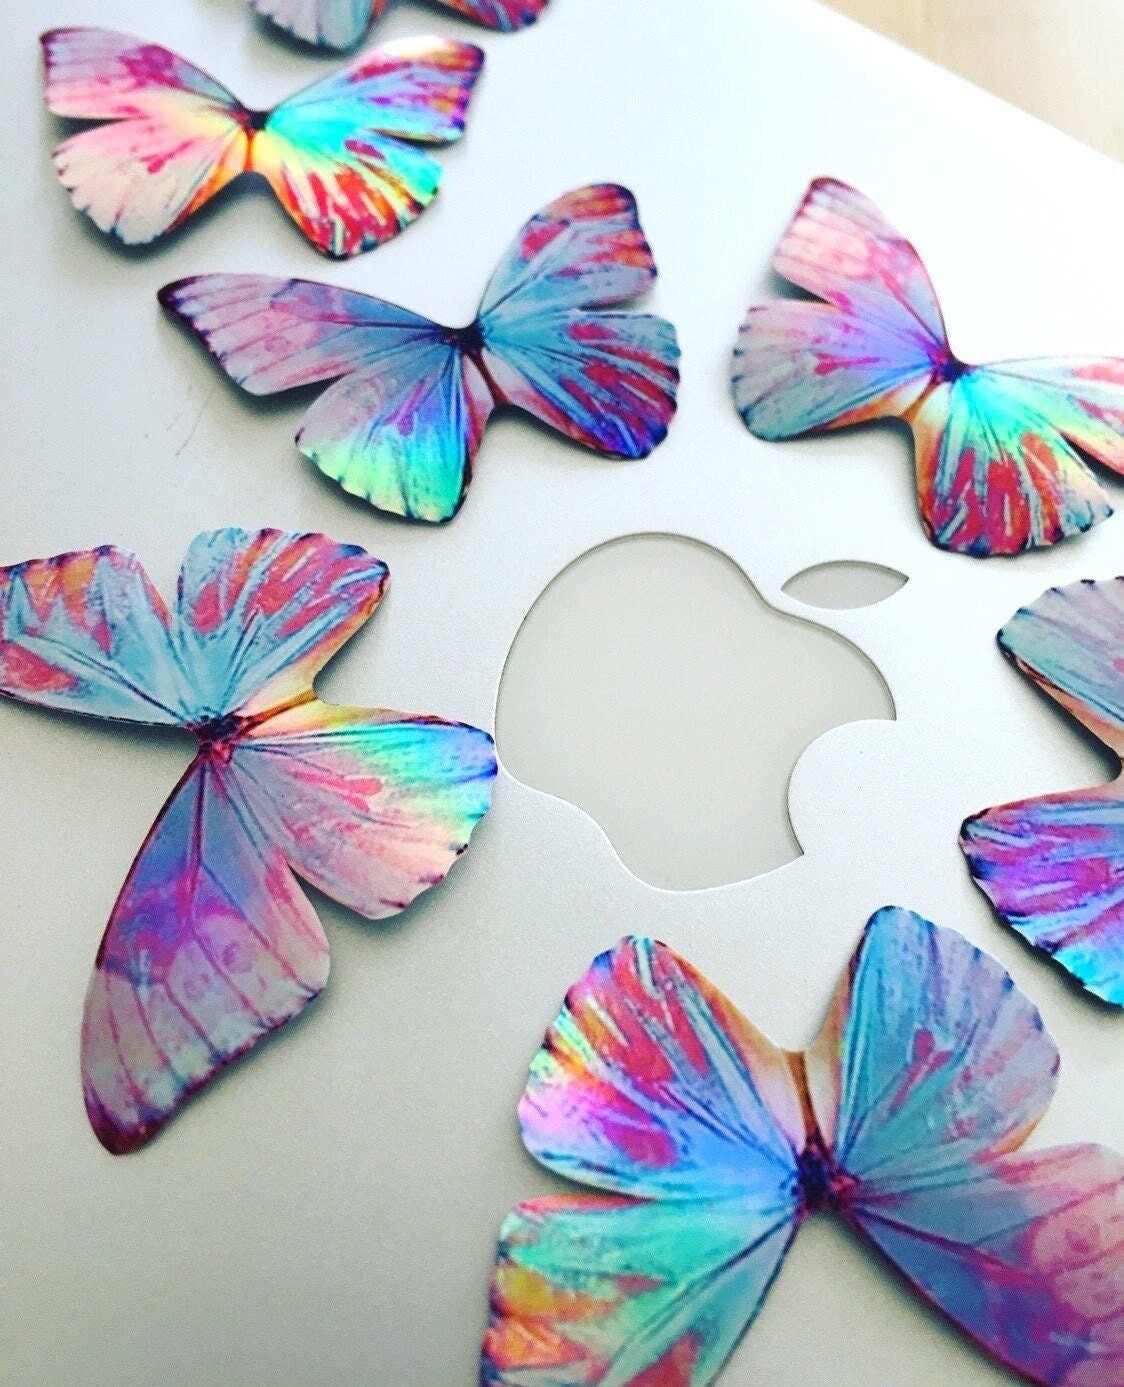 New Holographic UNICORN Butterfly Sticker Vinyl Decal Blue Morpho  Decorative Butterflies Pink Iridescent Blush Butterfly Stickers 